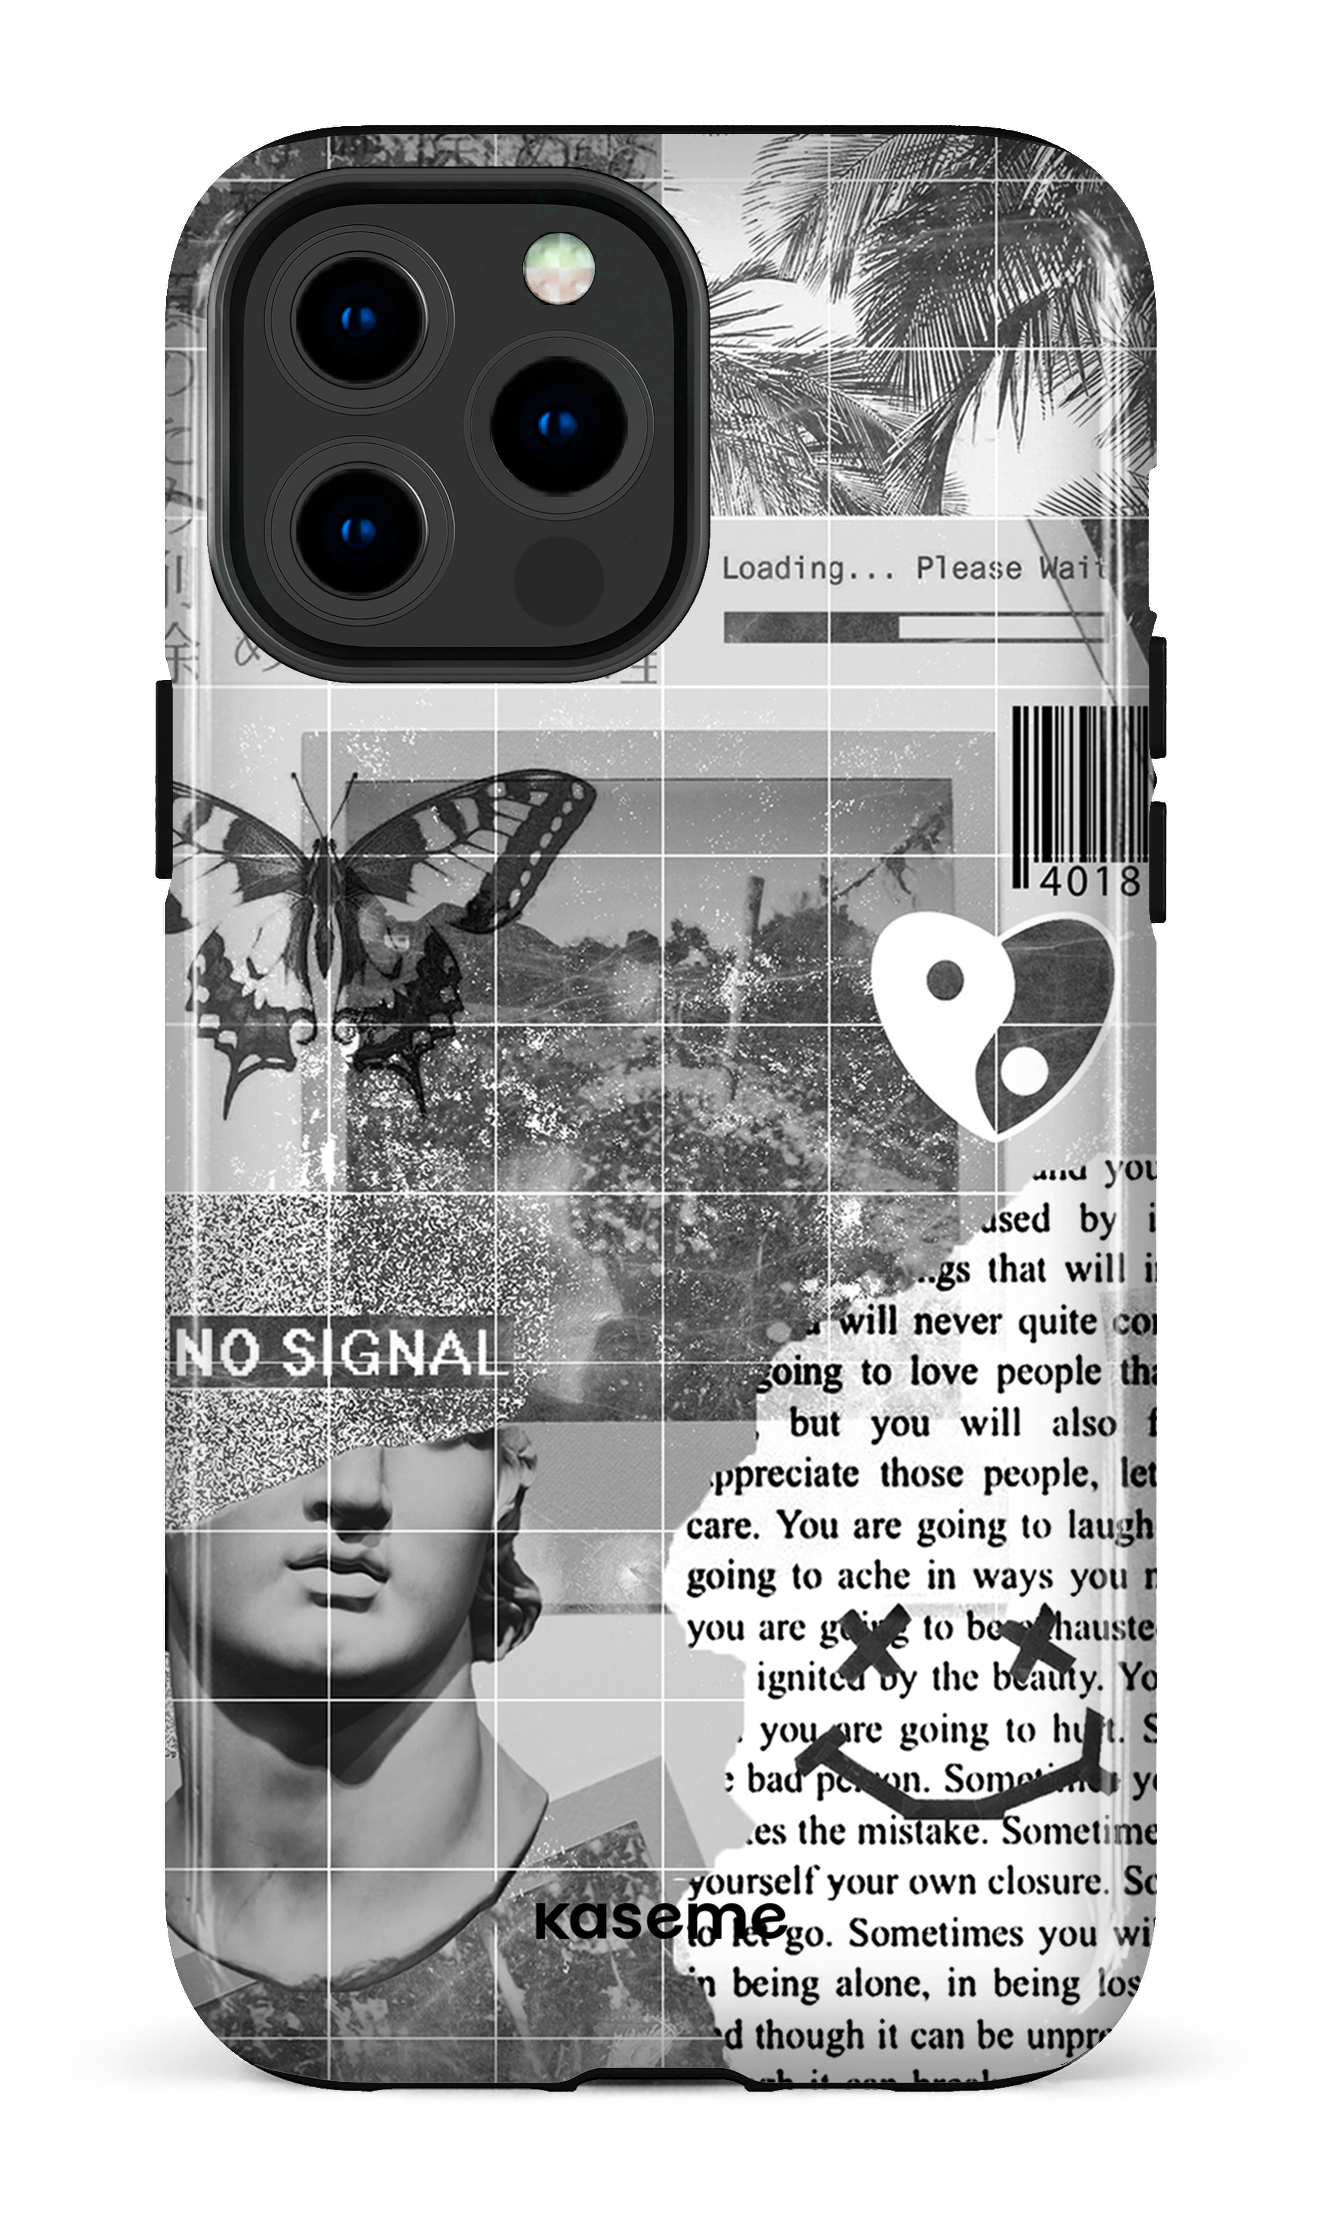 Supreme Iphone 13 pro max Mobile Back Cover and Phone Cases